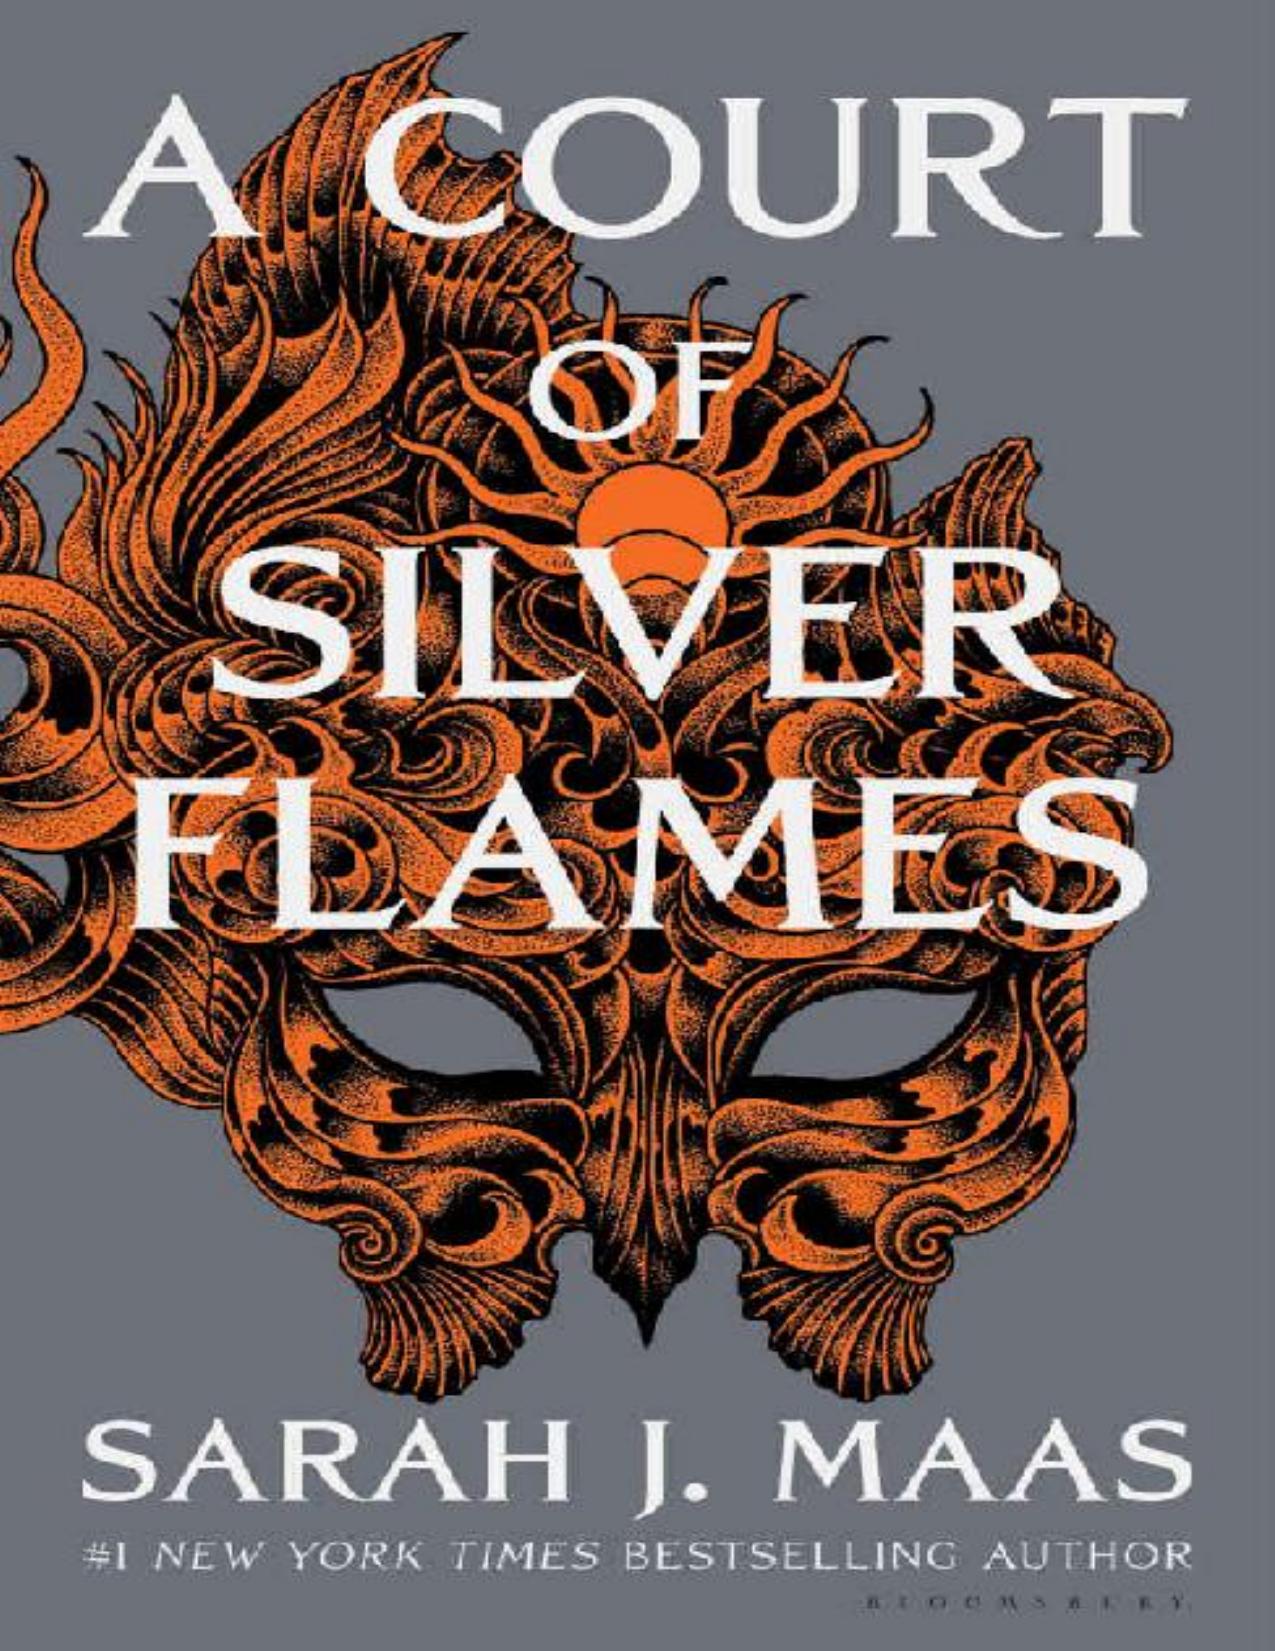 A Court of Silver Flames (A Court of Thorns and Roses) by Sarah J. Maas